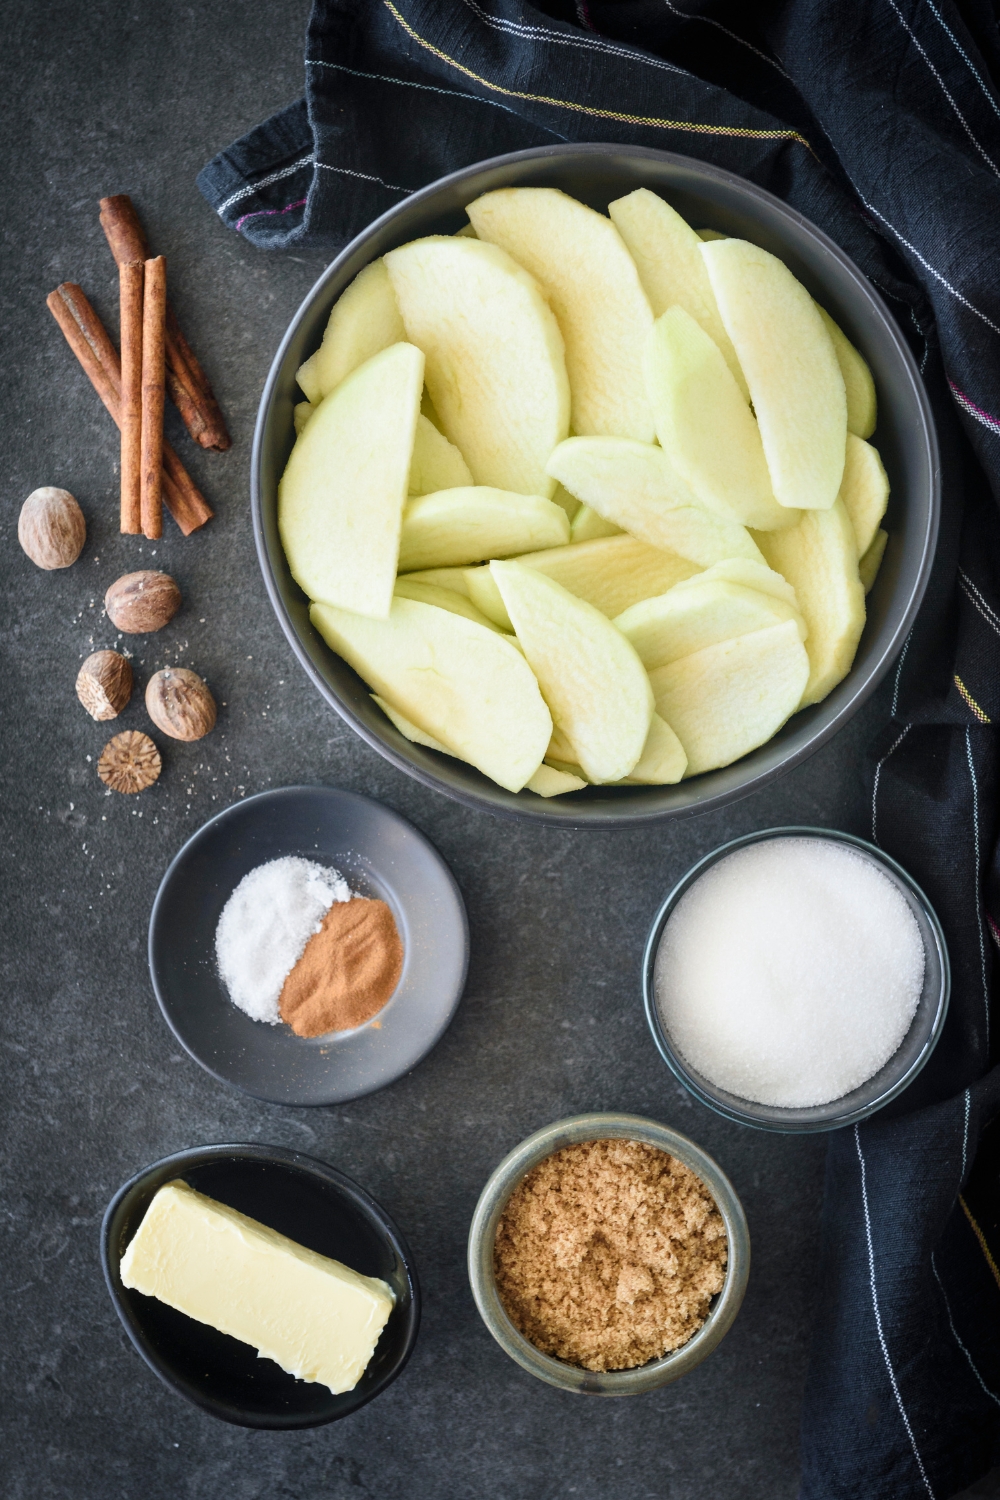 An assortment of ingredients including bowls of apple slices, butter, brown sugar, white sugar, spices, cinnamon sticks, and nutmeg all on a black countertop.